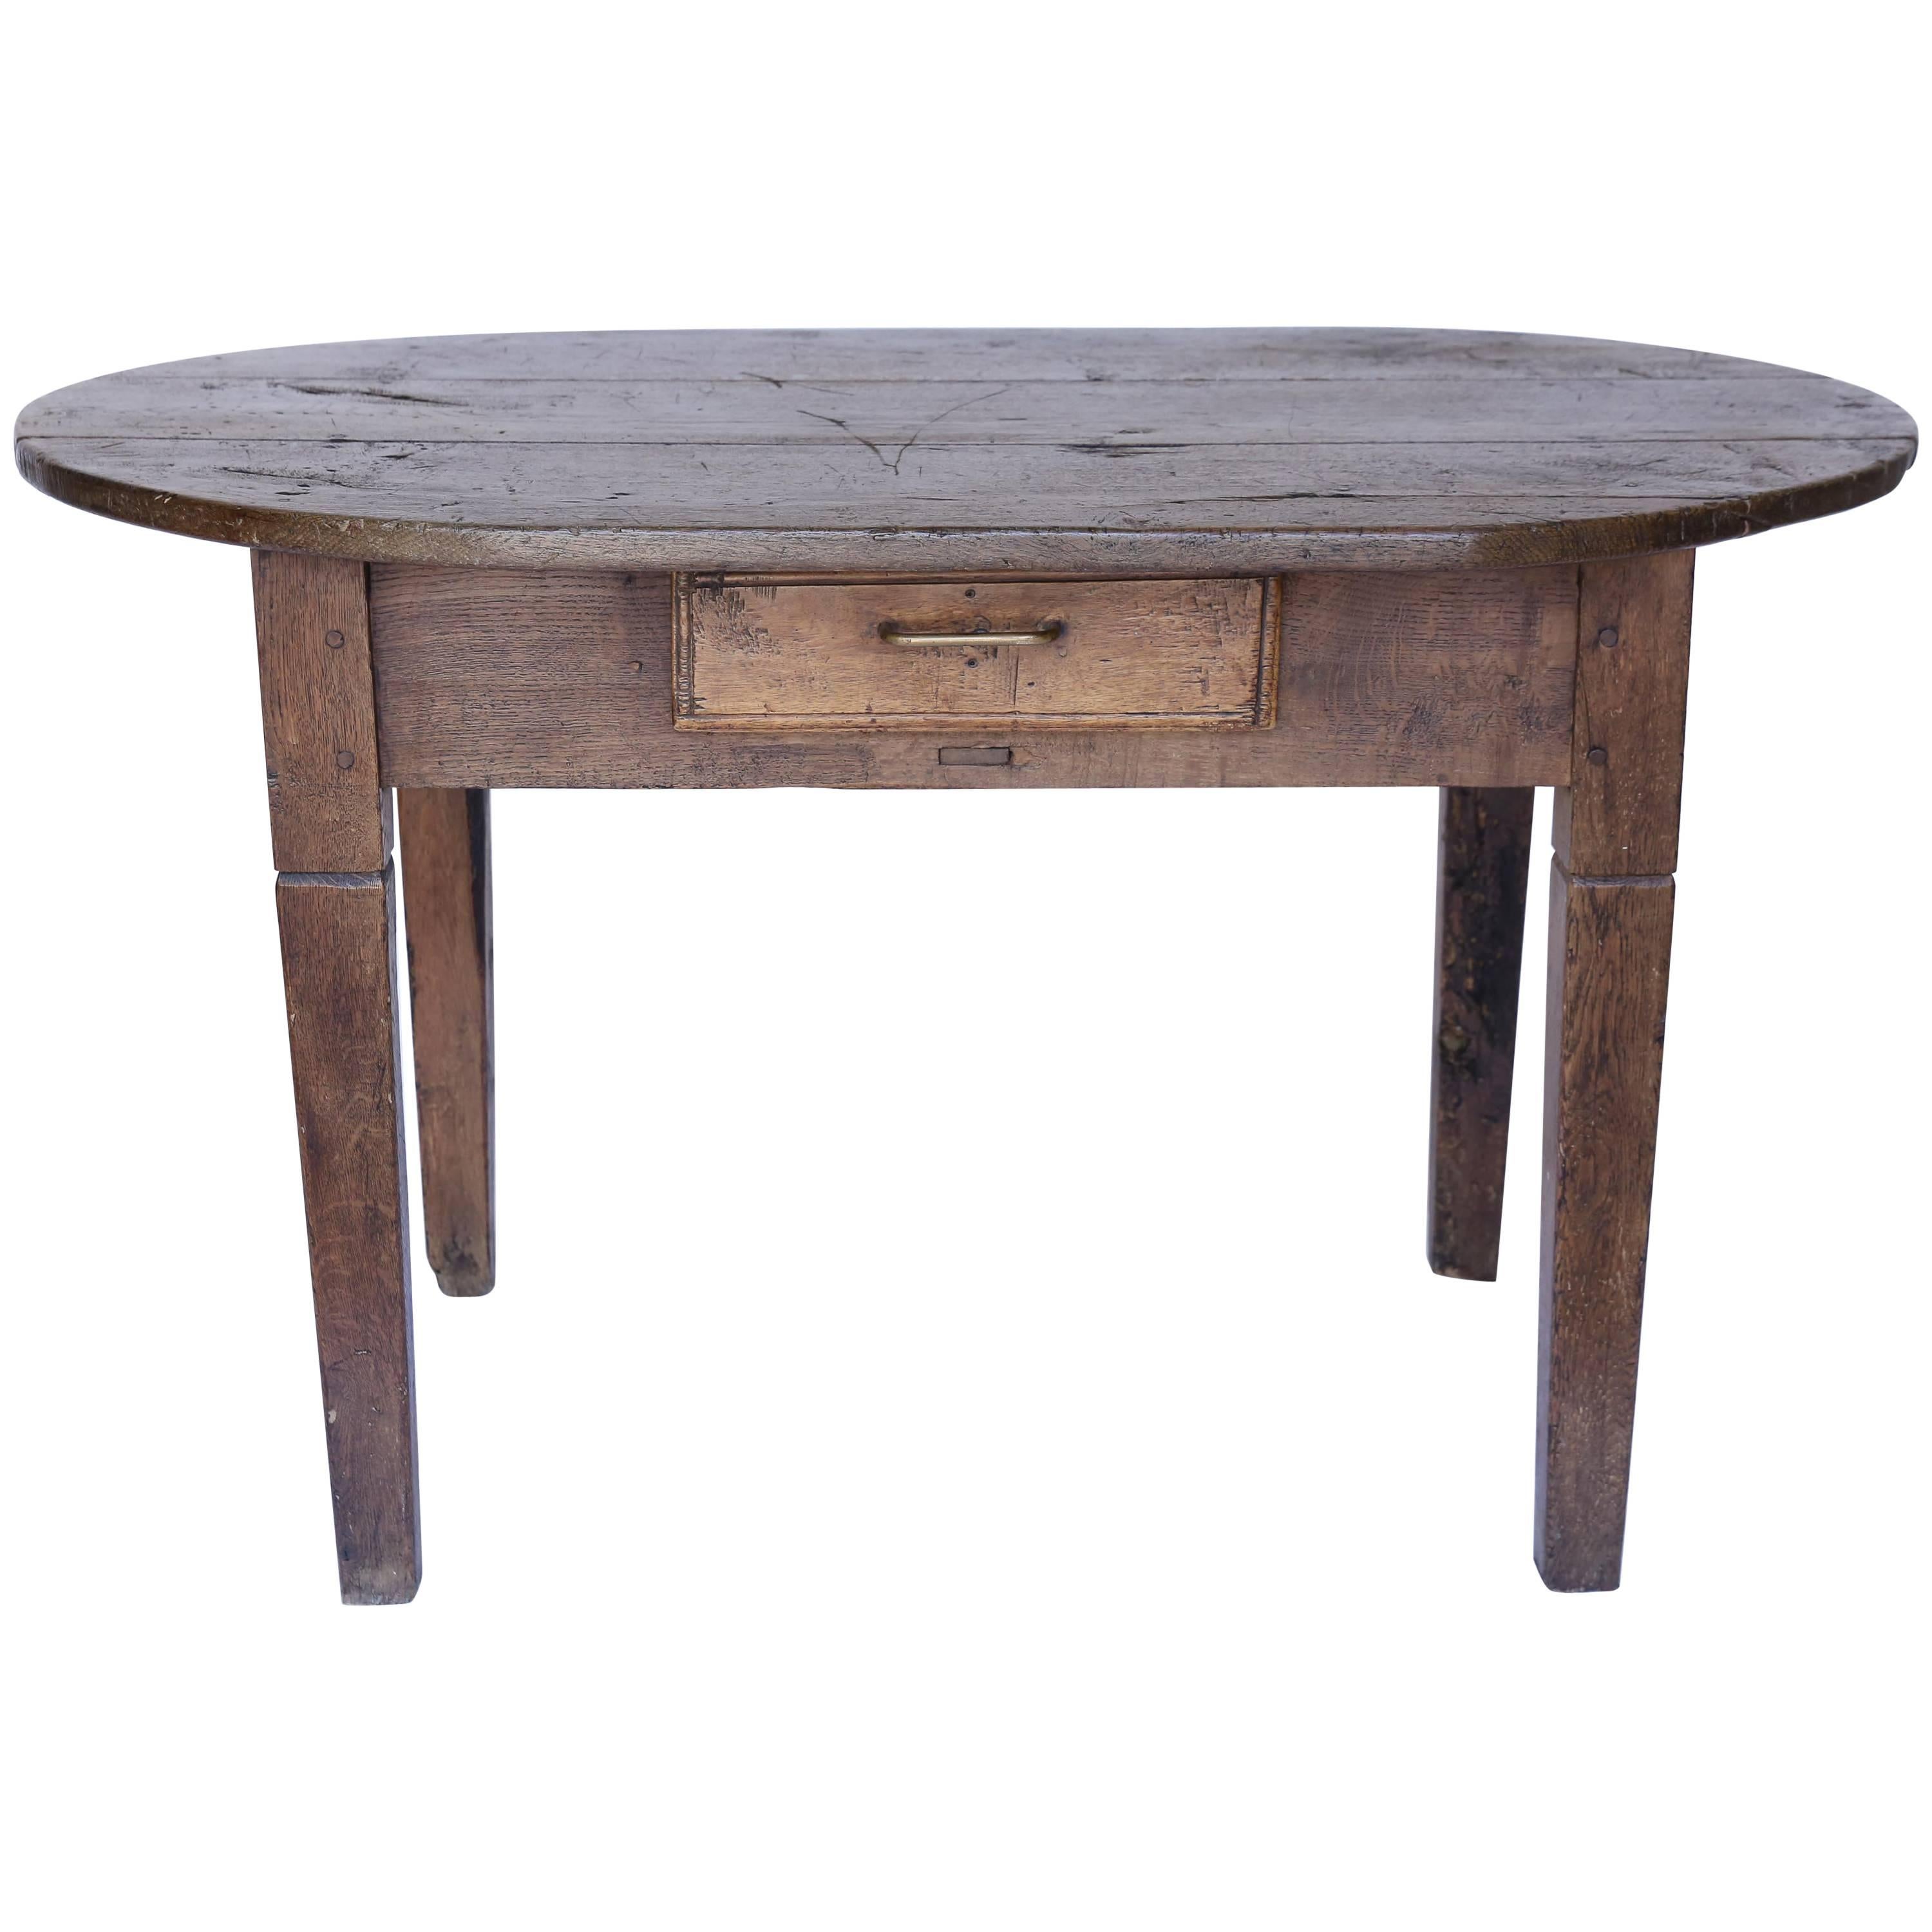 Oval Table from France, circa 1880